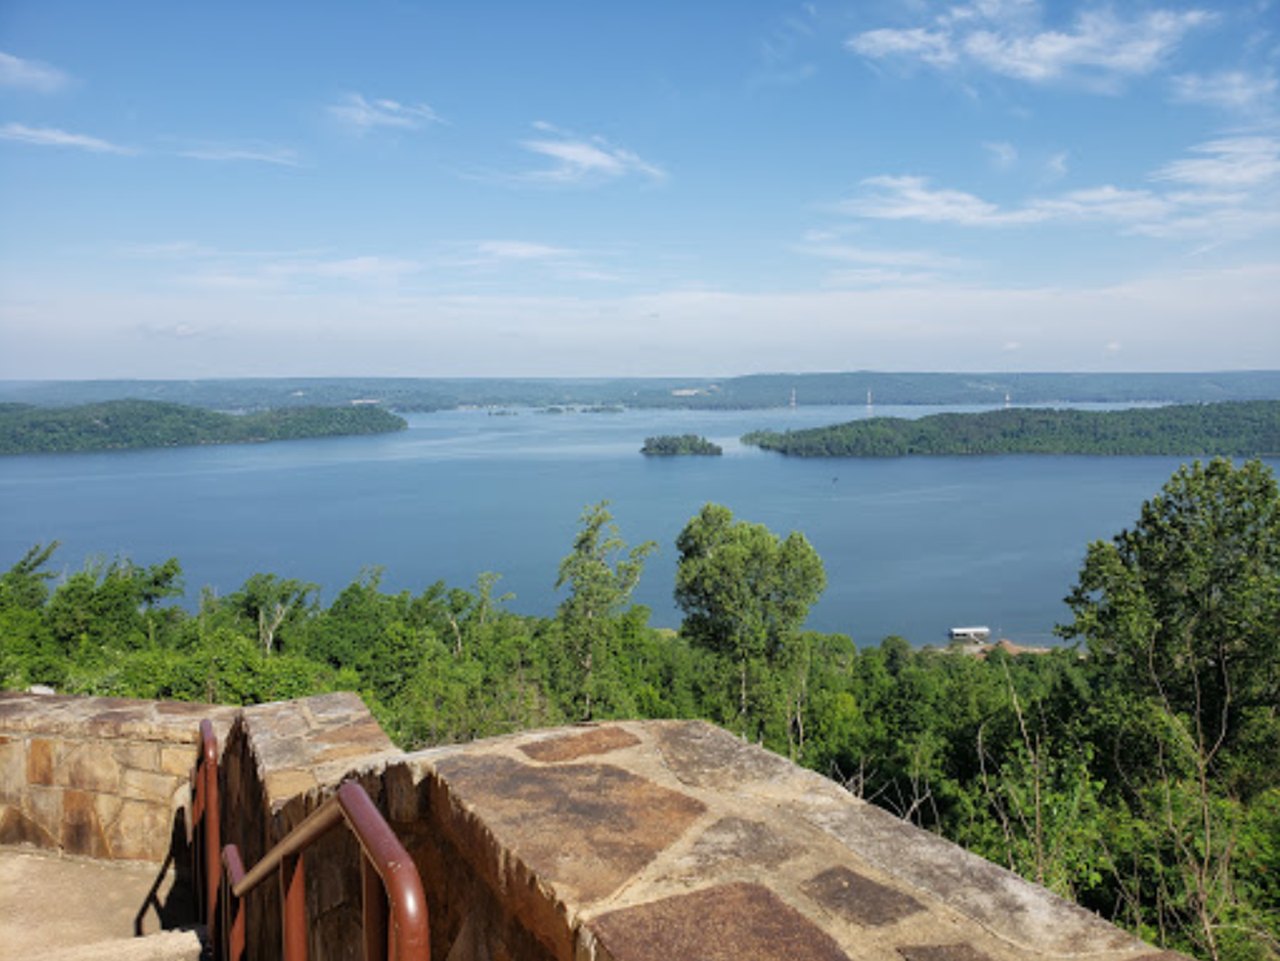 Hobbs State Park In Arkansas Has Bridges, Caves, Camping, And Trails